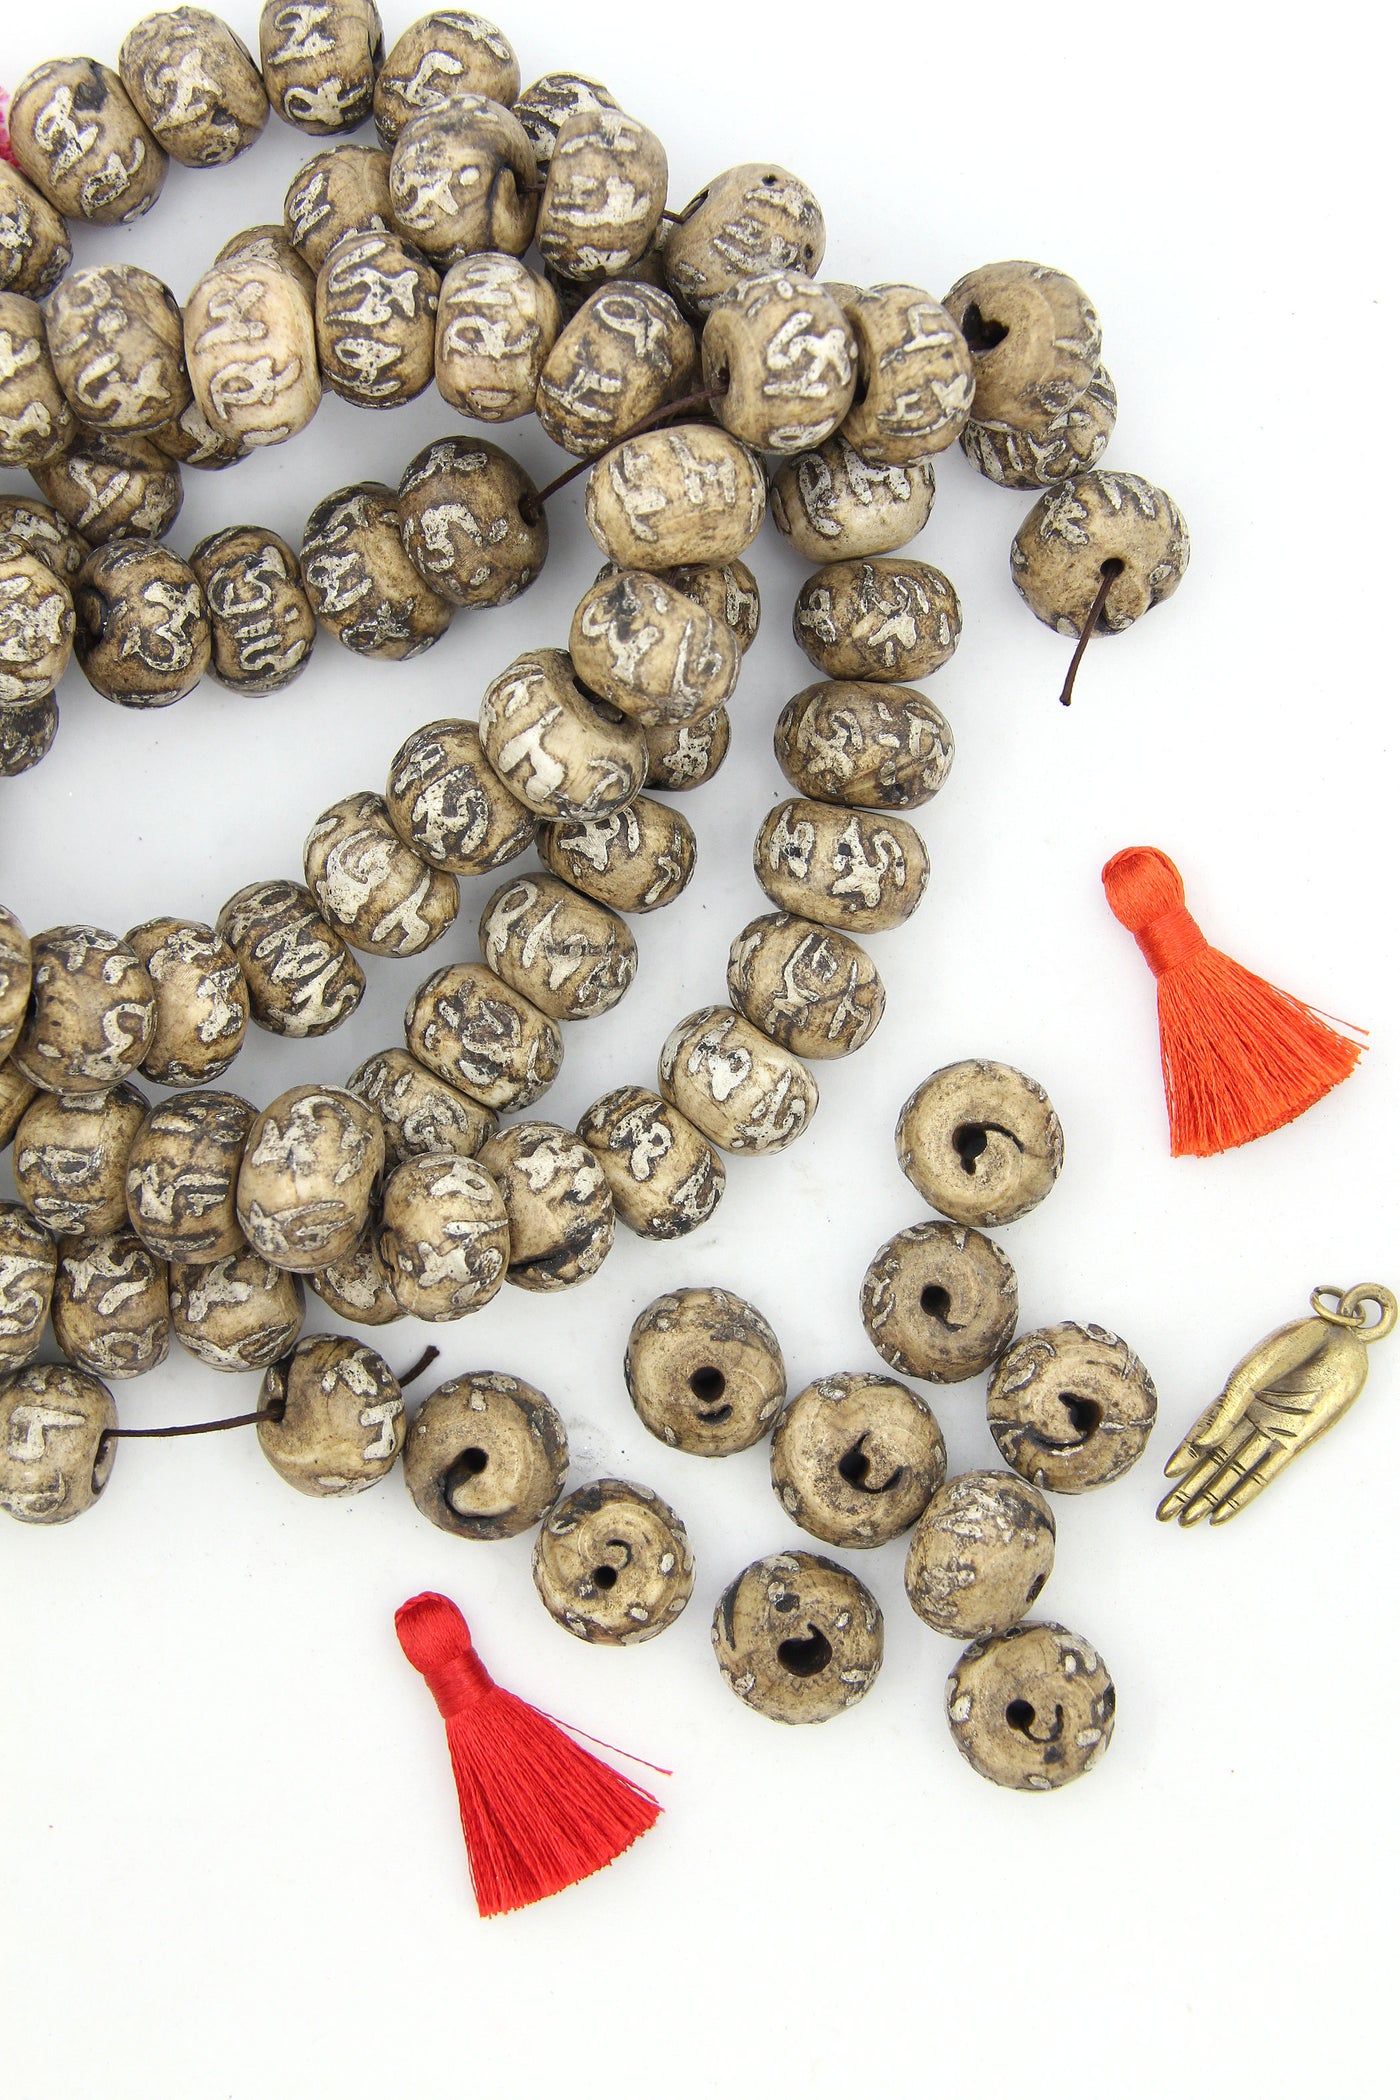 Om Mantra Hand-Carved Nepali Shell Beads, 18x12mm, 4 pieces